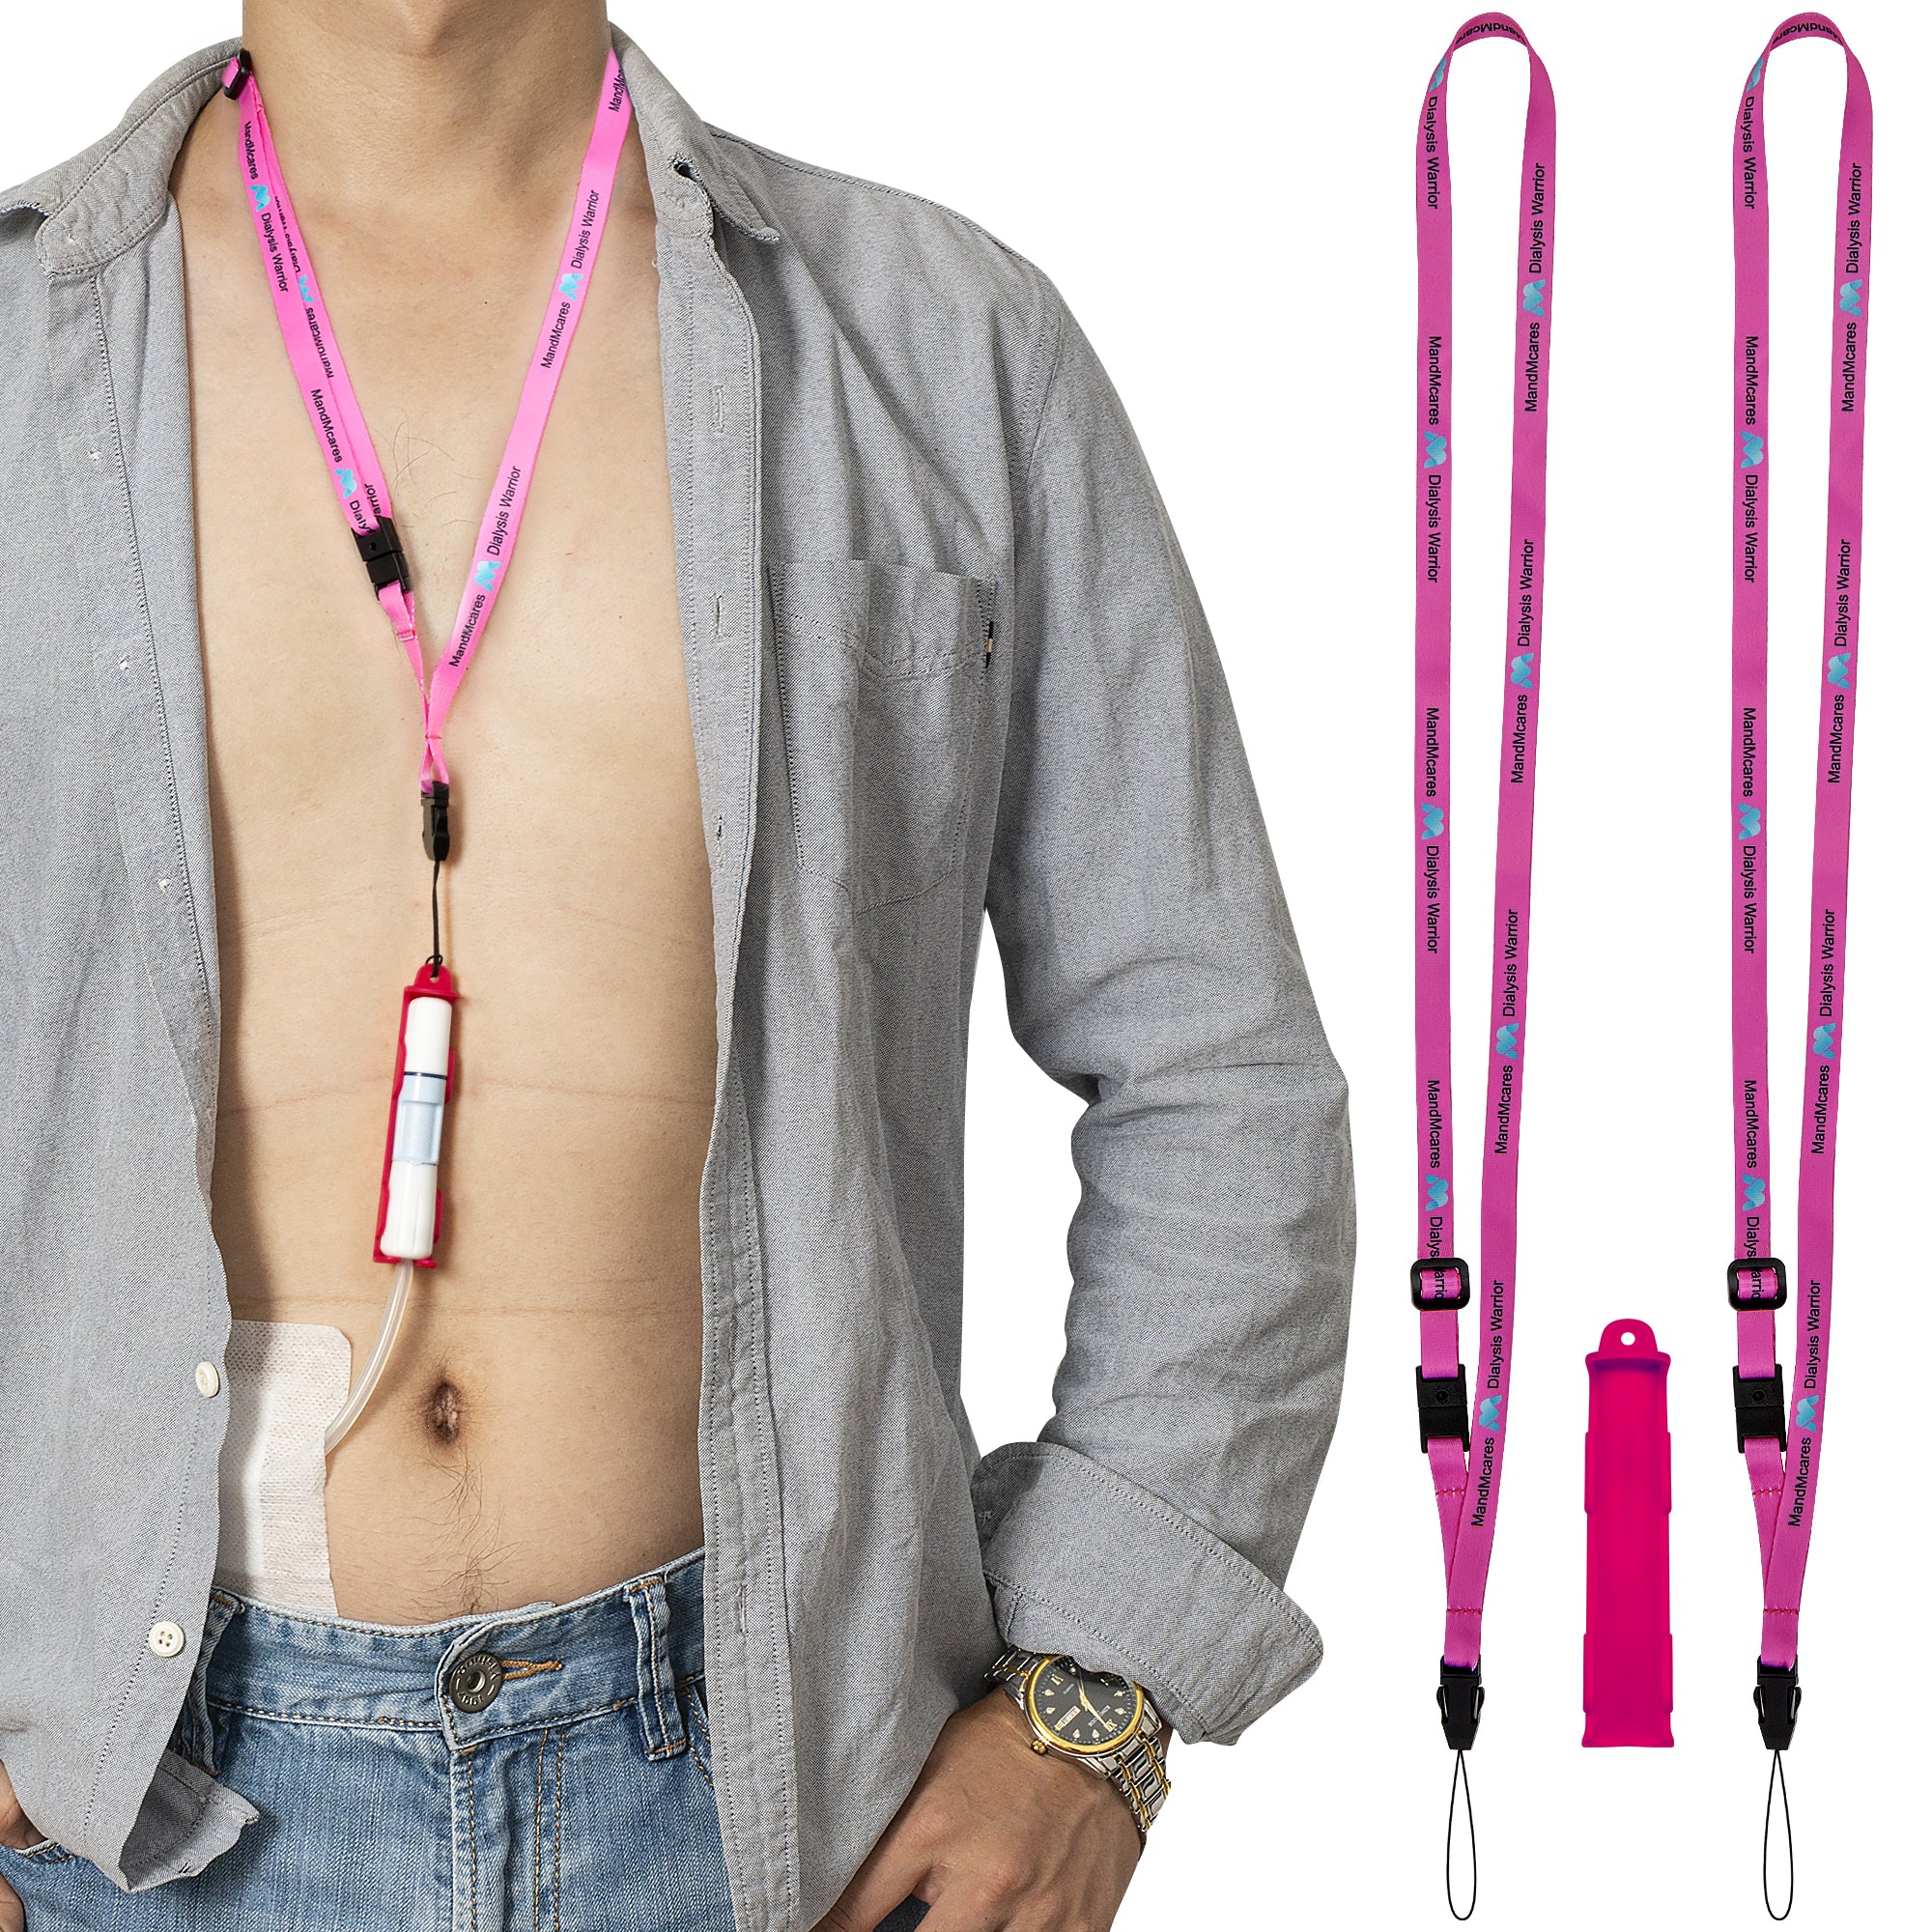 New PD Transfer Set Holder for Baxter2.0 | Lanyards w/ Breakaway Feature